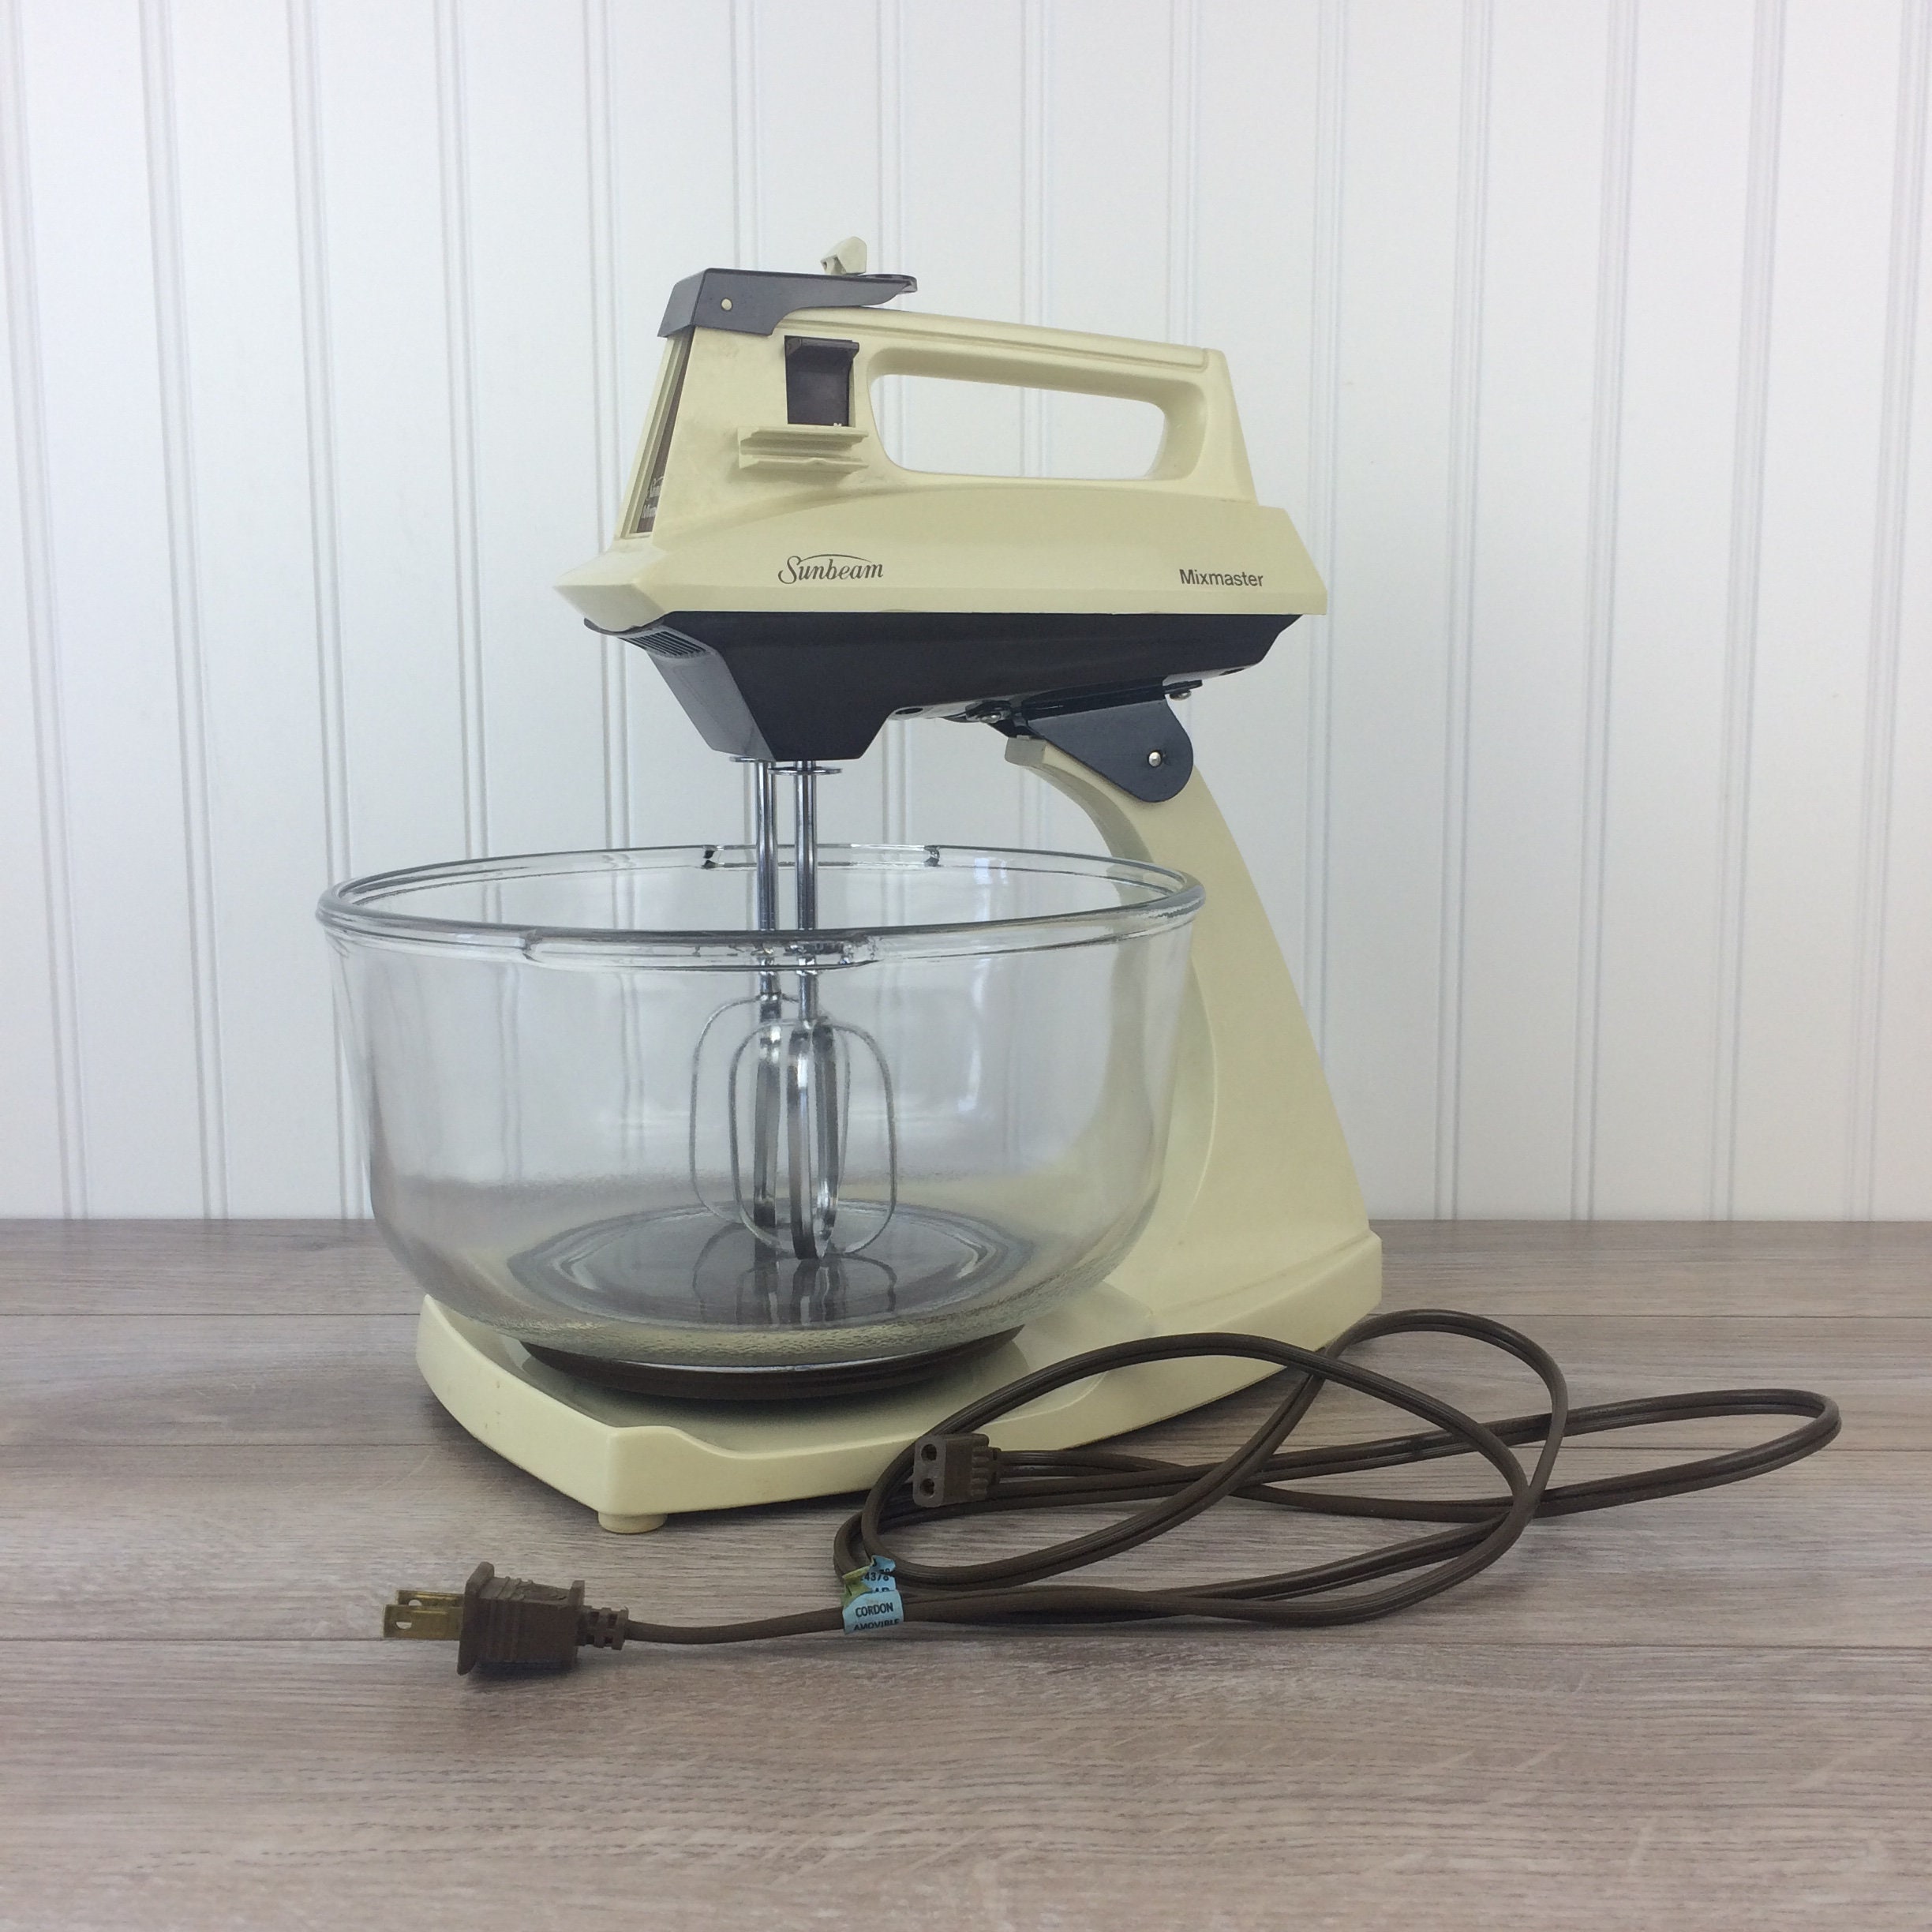 Vintage Electric Stand Mixer / Sunbeam Mixmaster / 5 Speeds With Burst of  Power / Large Mixing Bowl / Almond / Retro Kitchenware, Cookware 